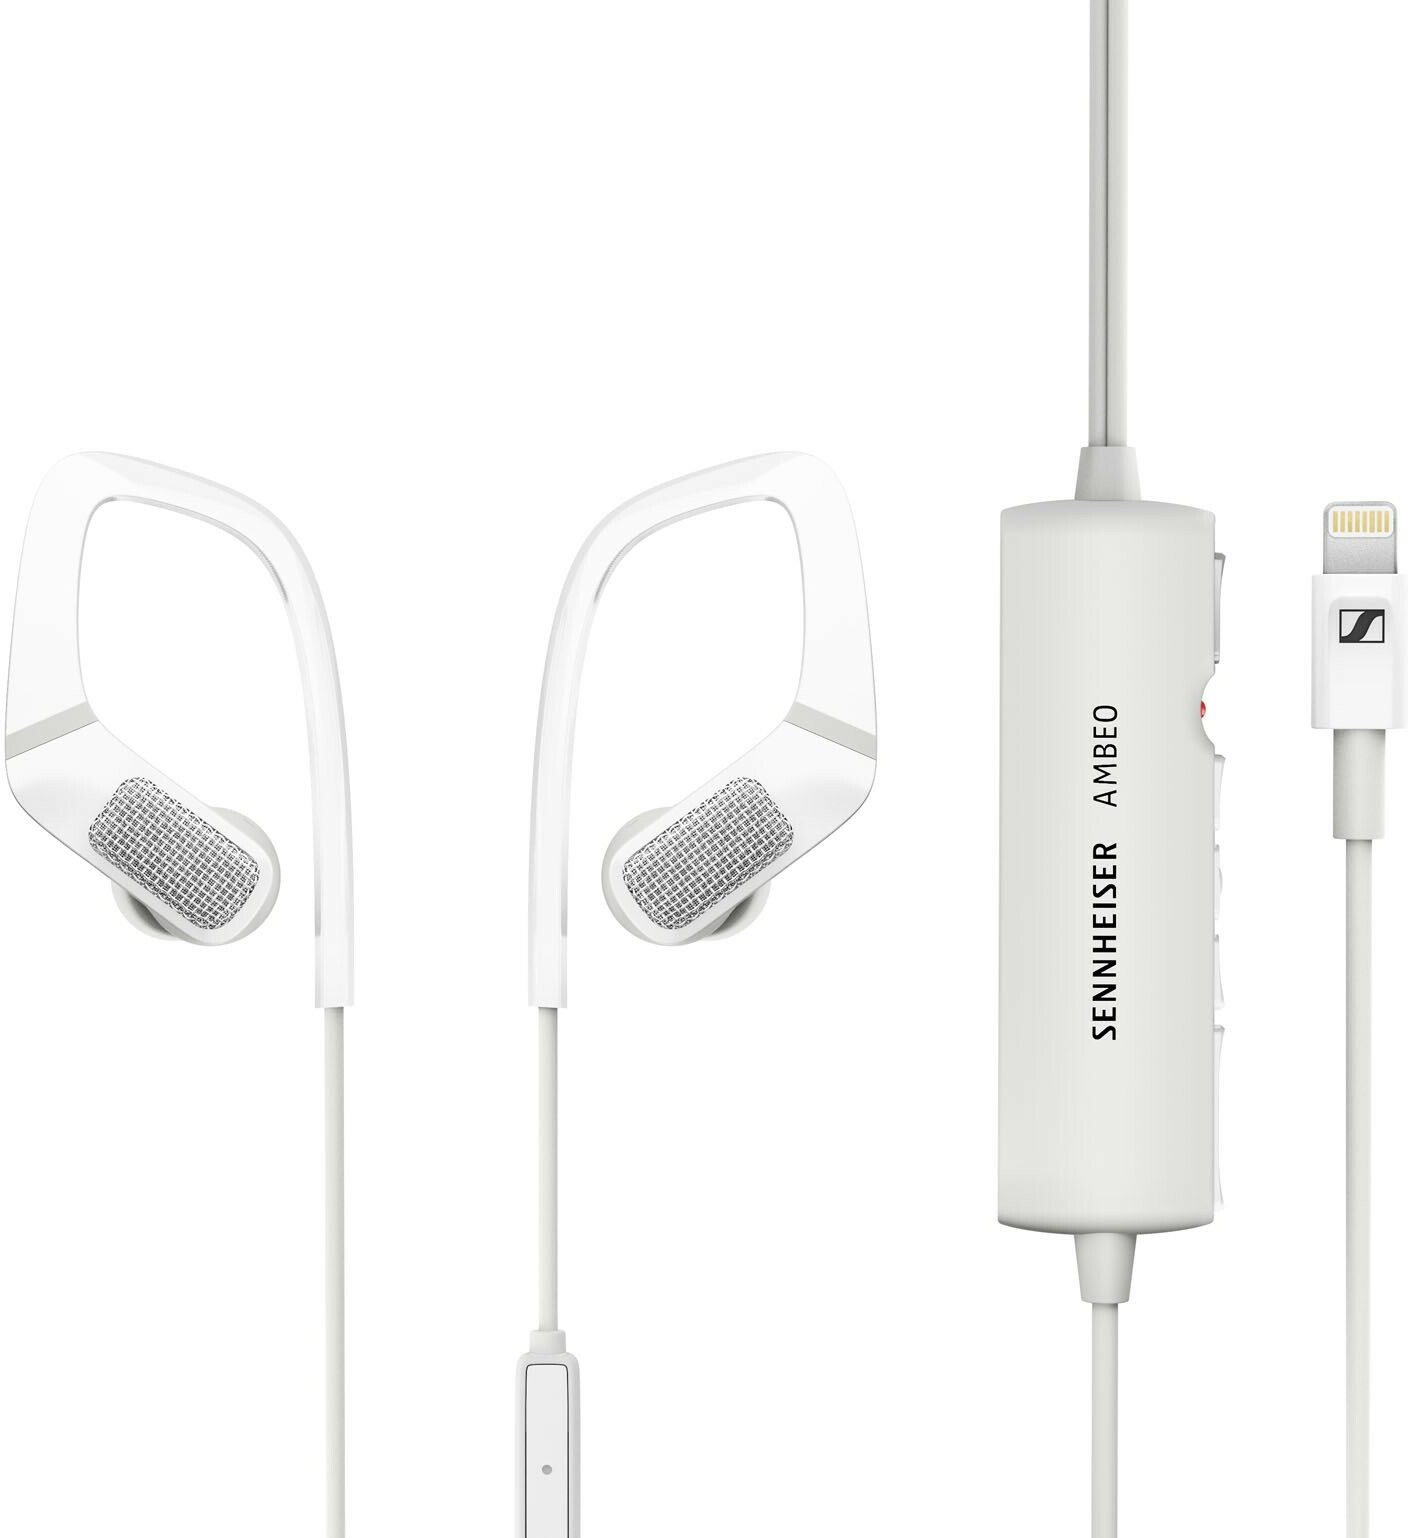 Sennheiser Ambeo Smart Headset - Ecouteur Intra-auriculaire - Main picture